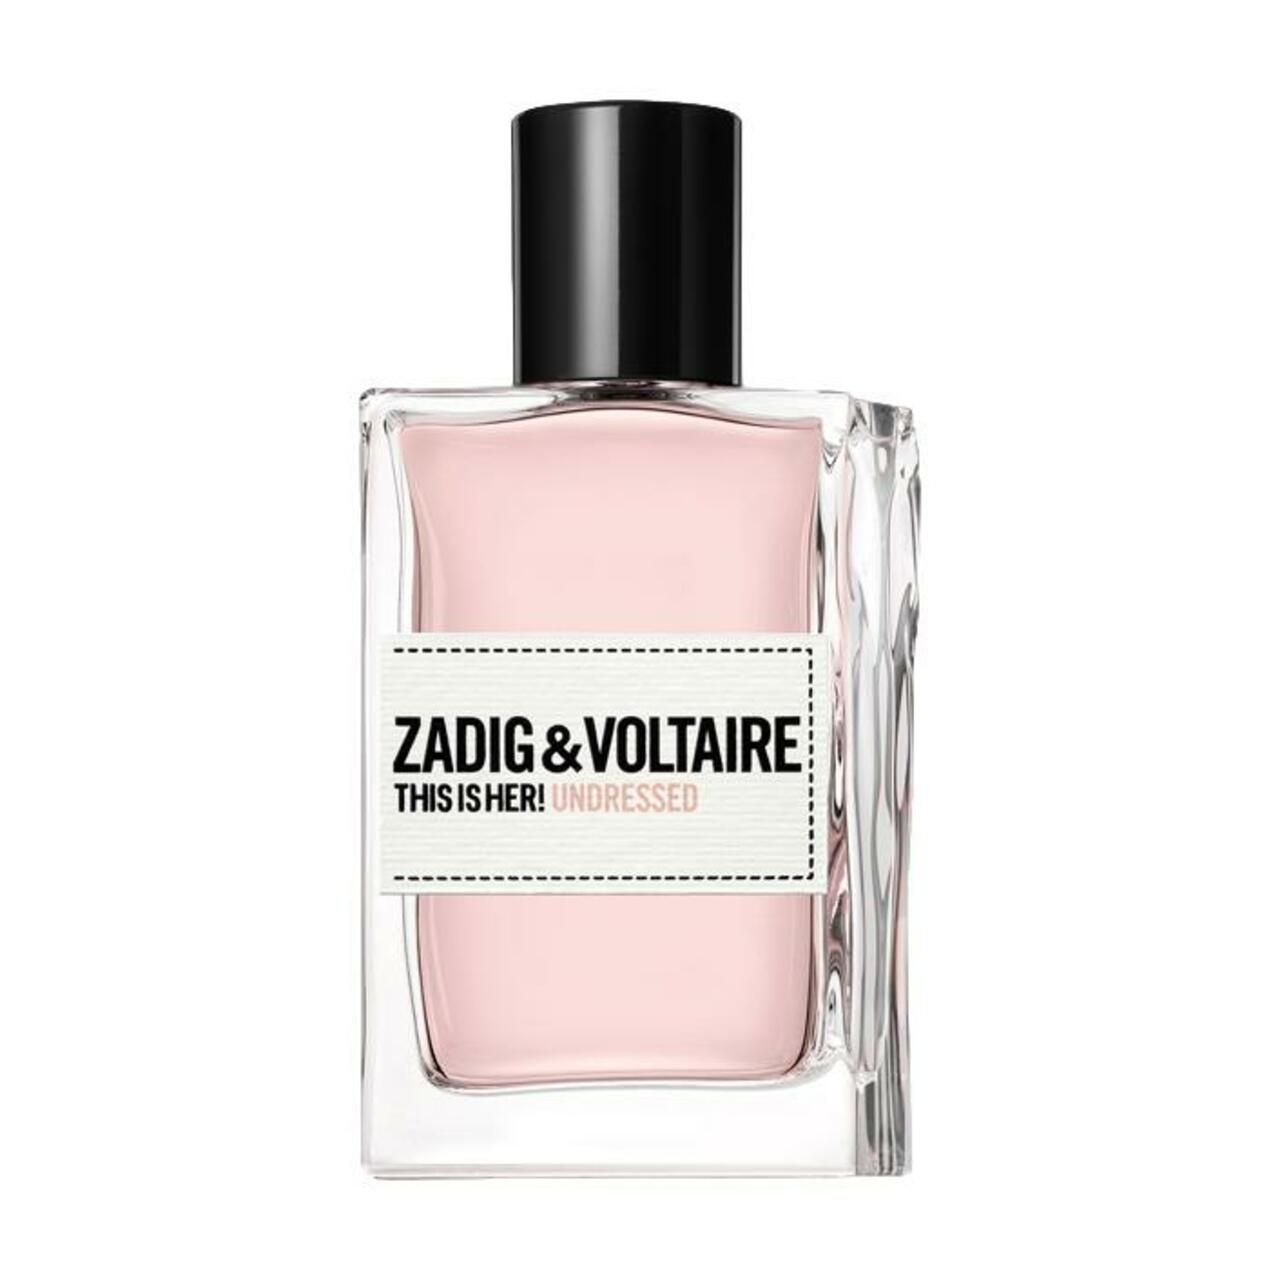 Zadig & Voltaire, This is Her! Undressed  E.d.P. Nat. Spray